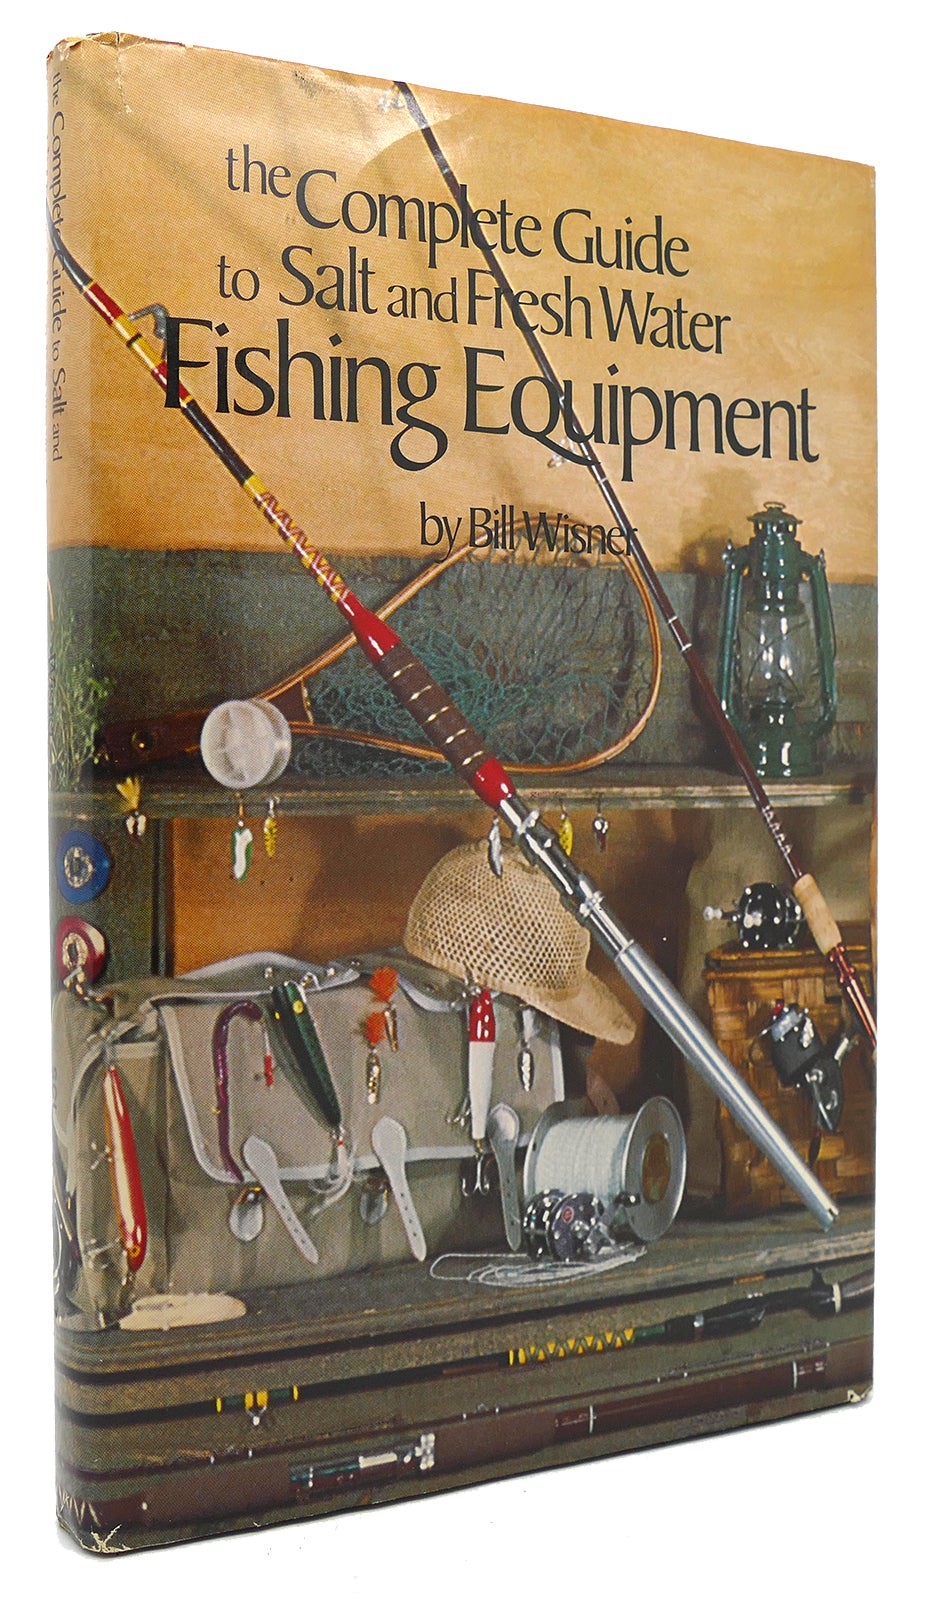 THE COMPLETE GUIDE TO SALT AND FRESH WATER FISHING EQUIPMENT, William L.  Wisner